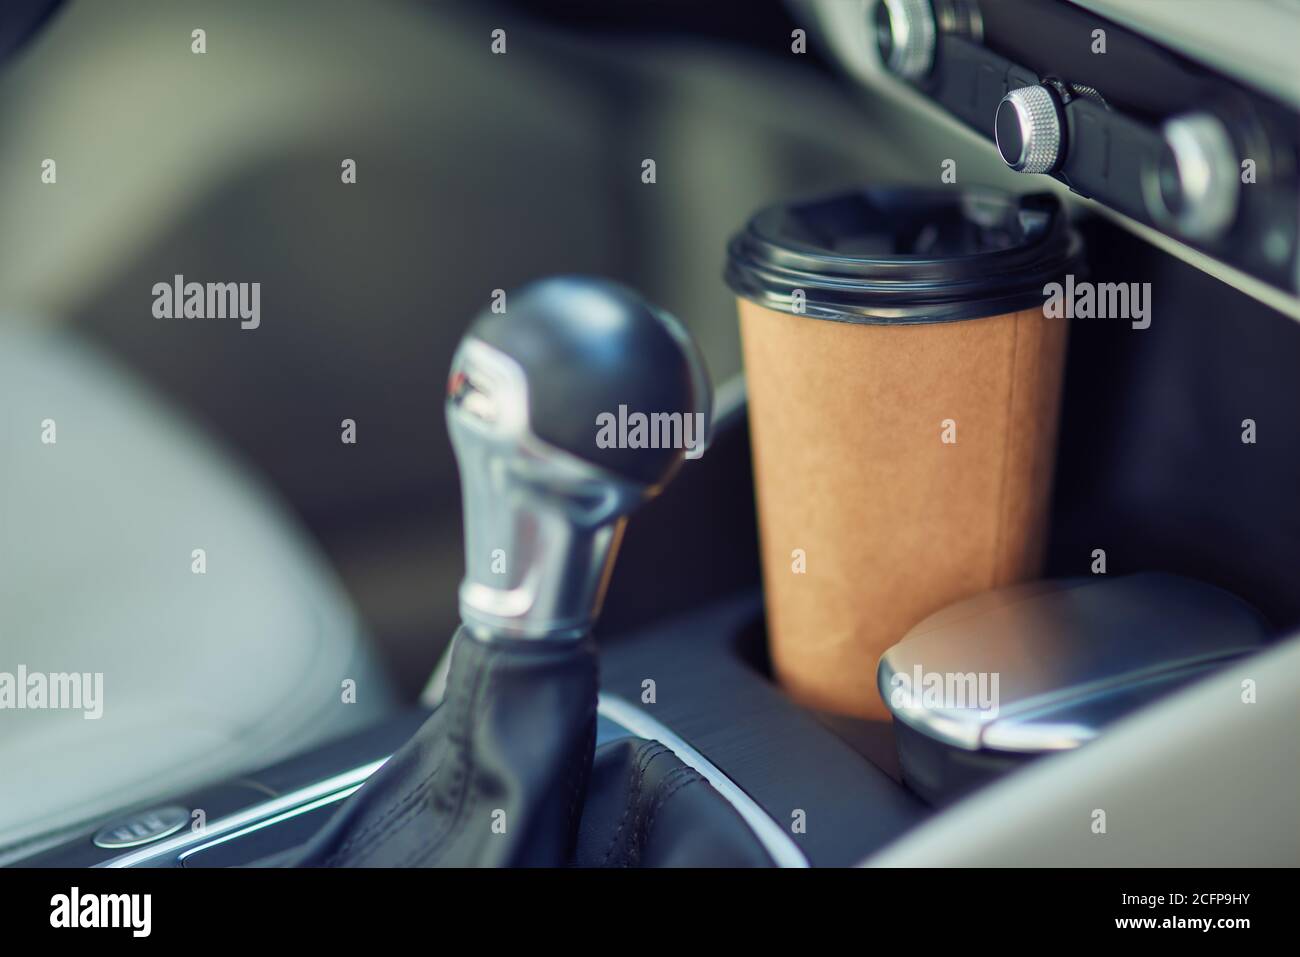 Close up shot of a paper cup of coffee in the cup holder between